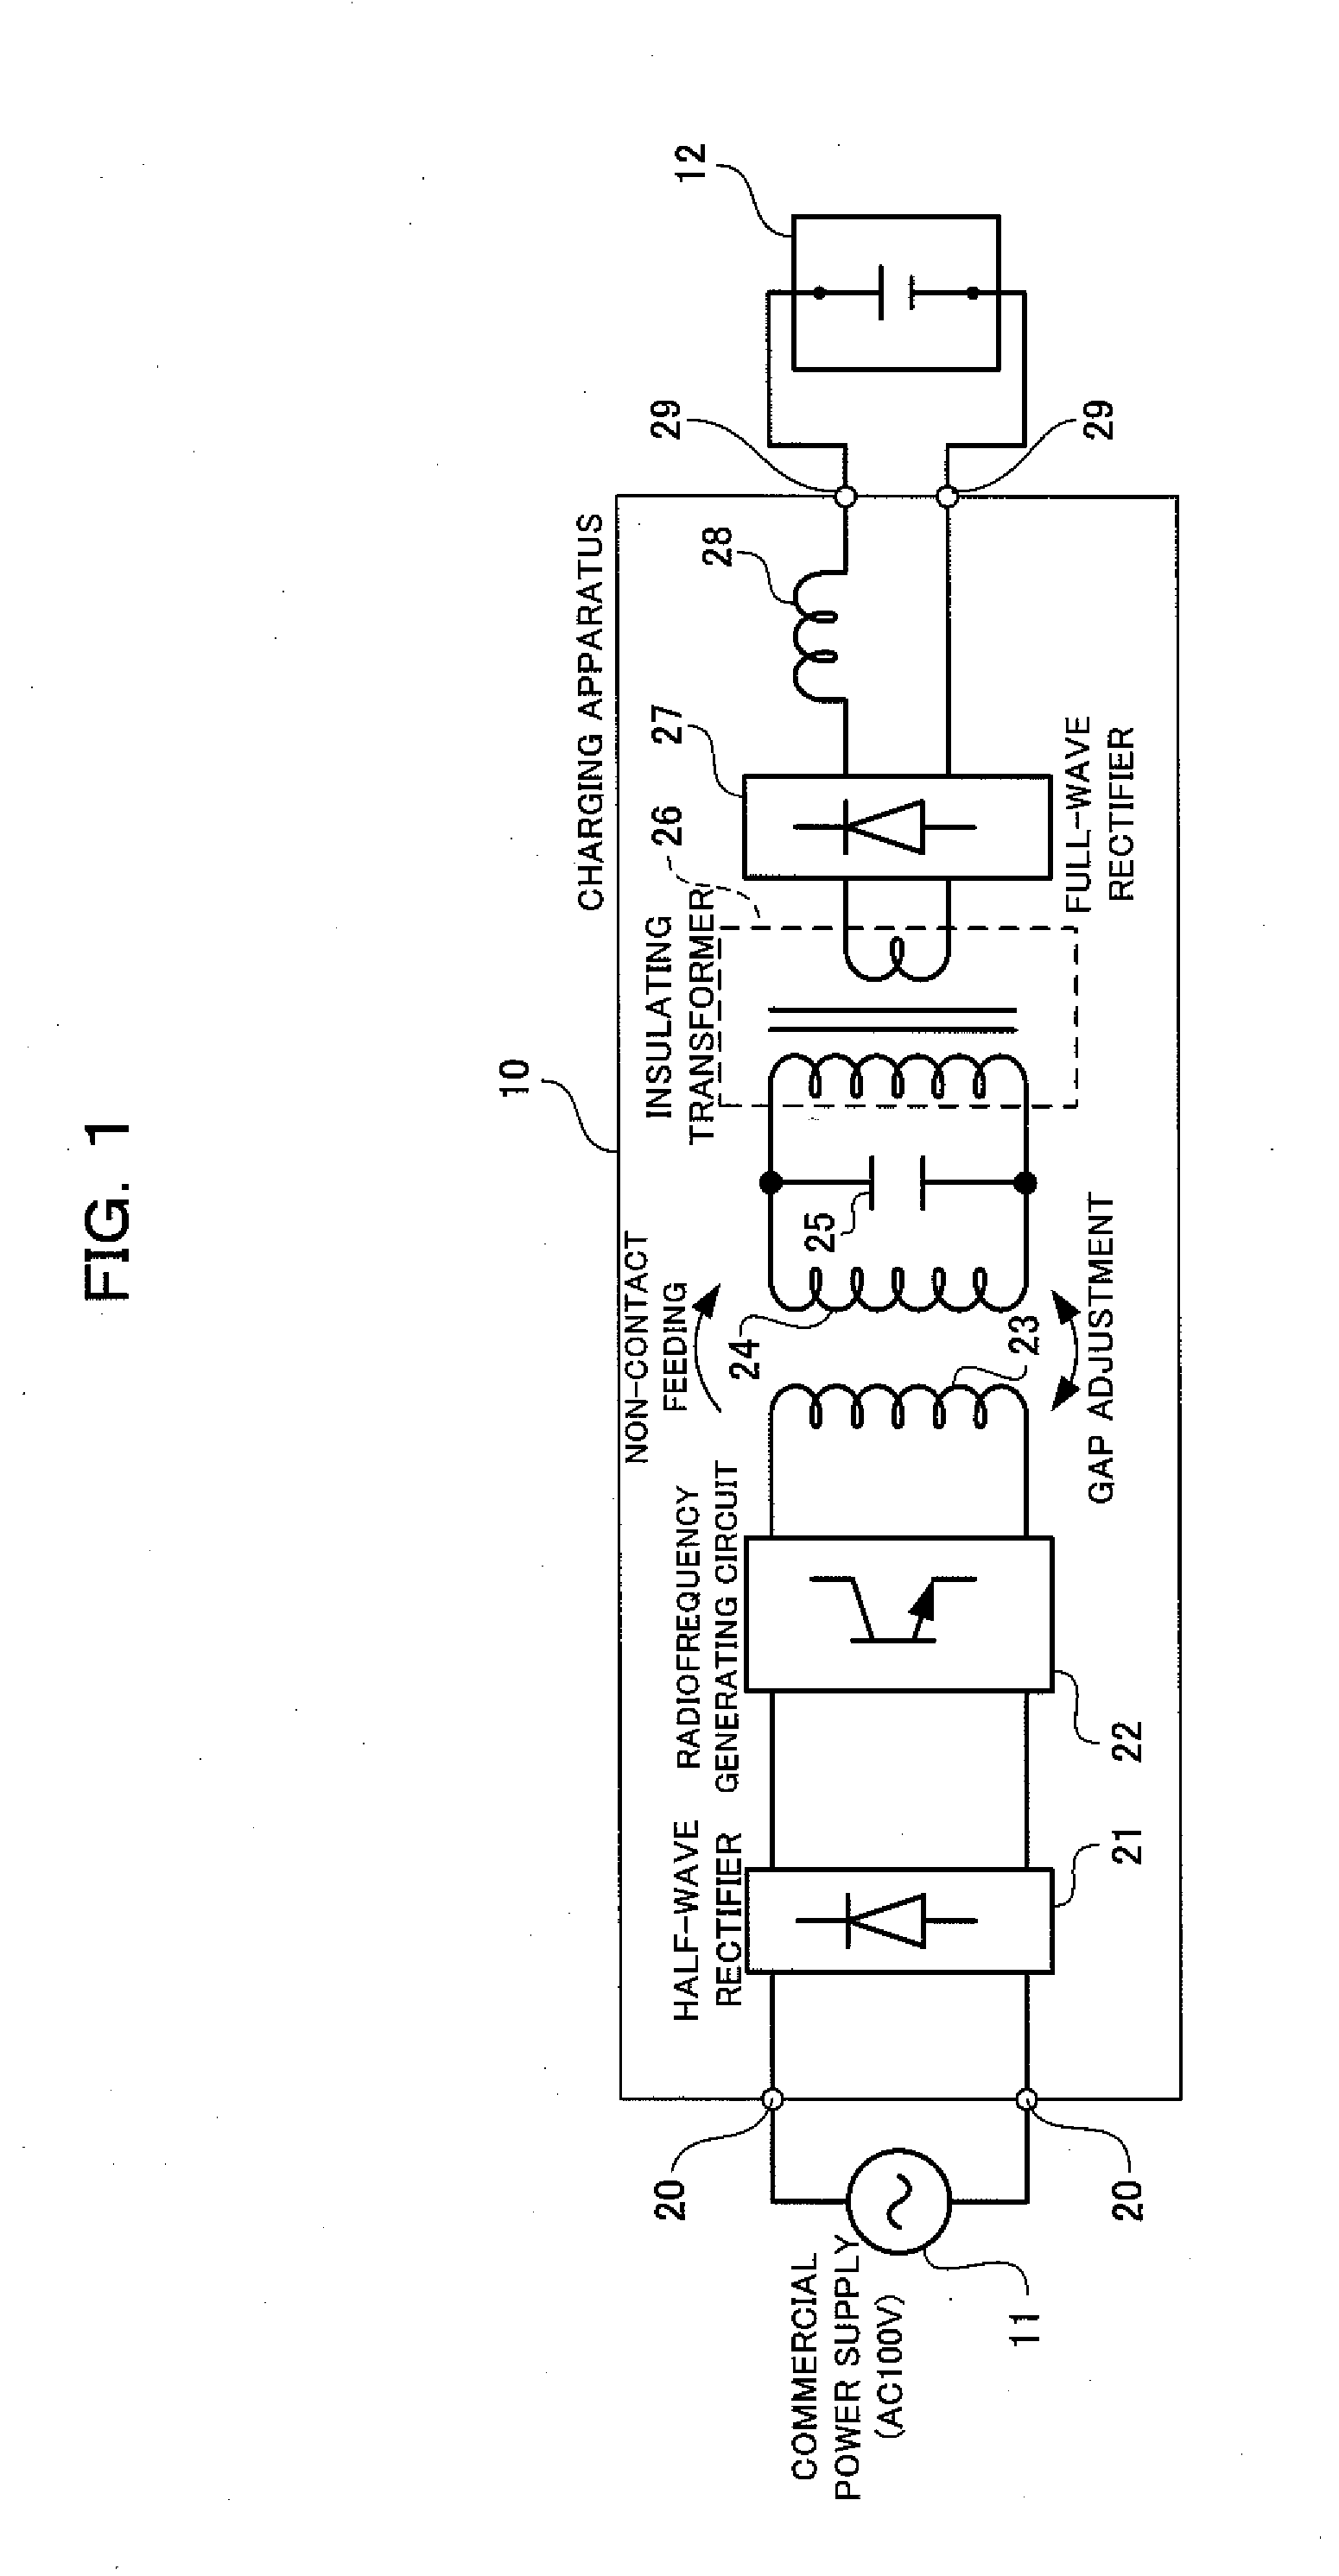 Charging apparatus for lead storage battery